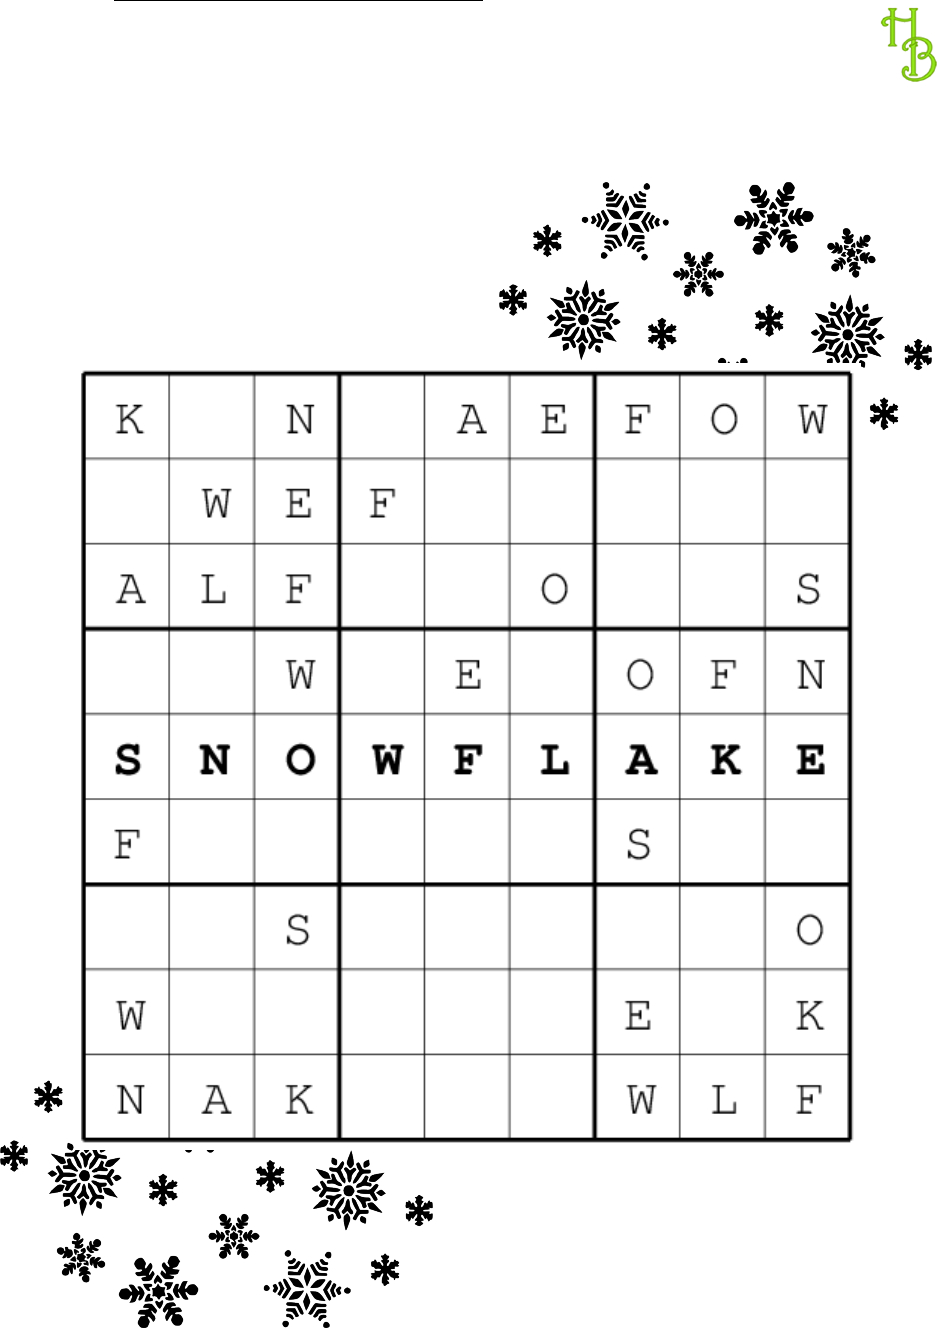 Variety Of Sudoku Puzzles Pkt With Answers - [Pdf Document]